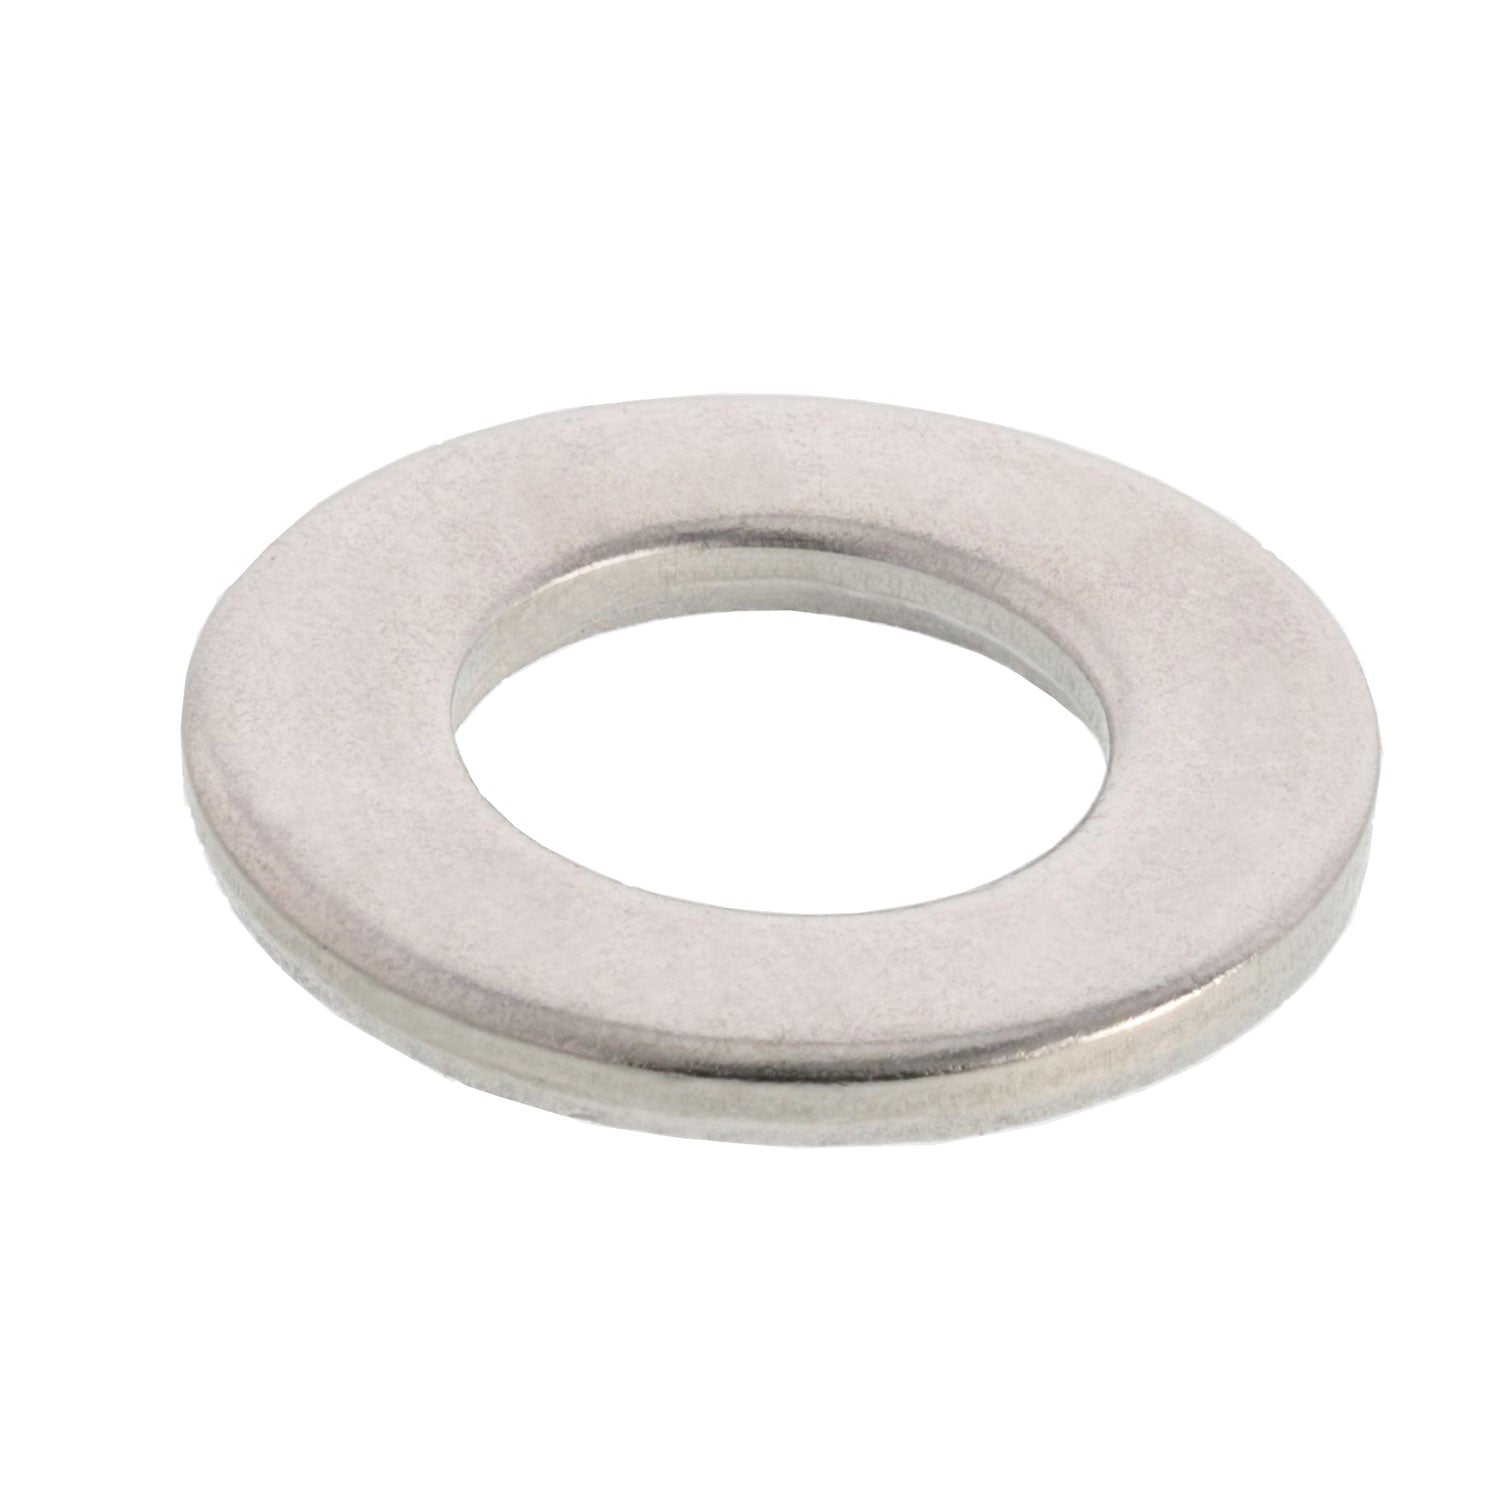 Stainless Steel Flat Washer